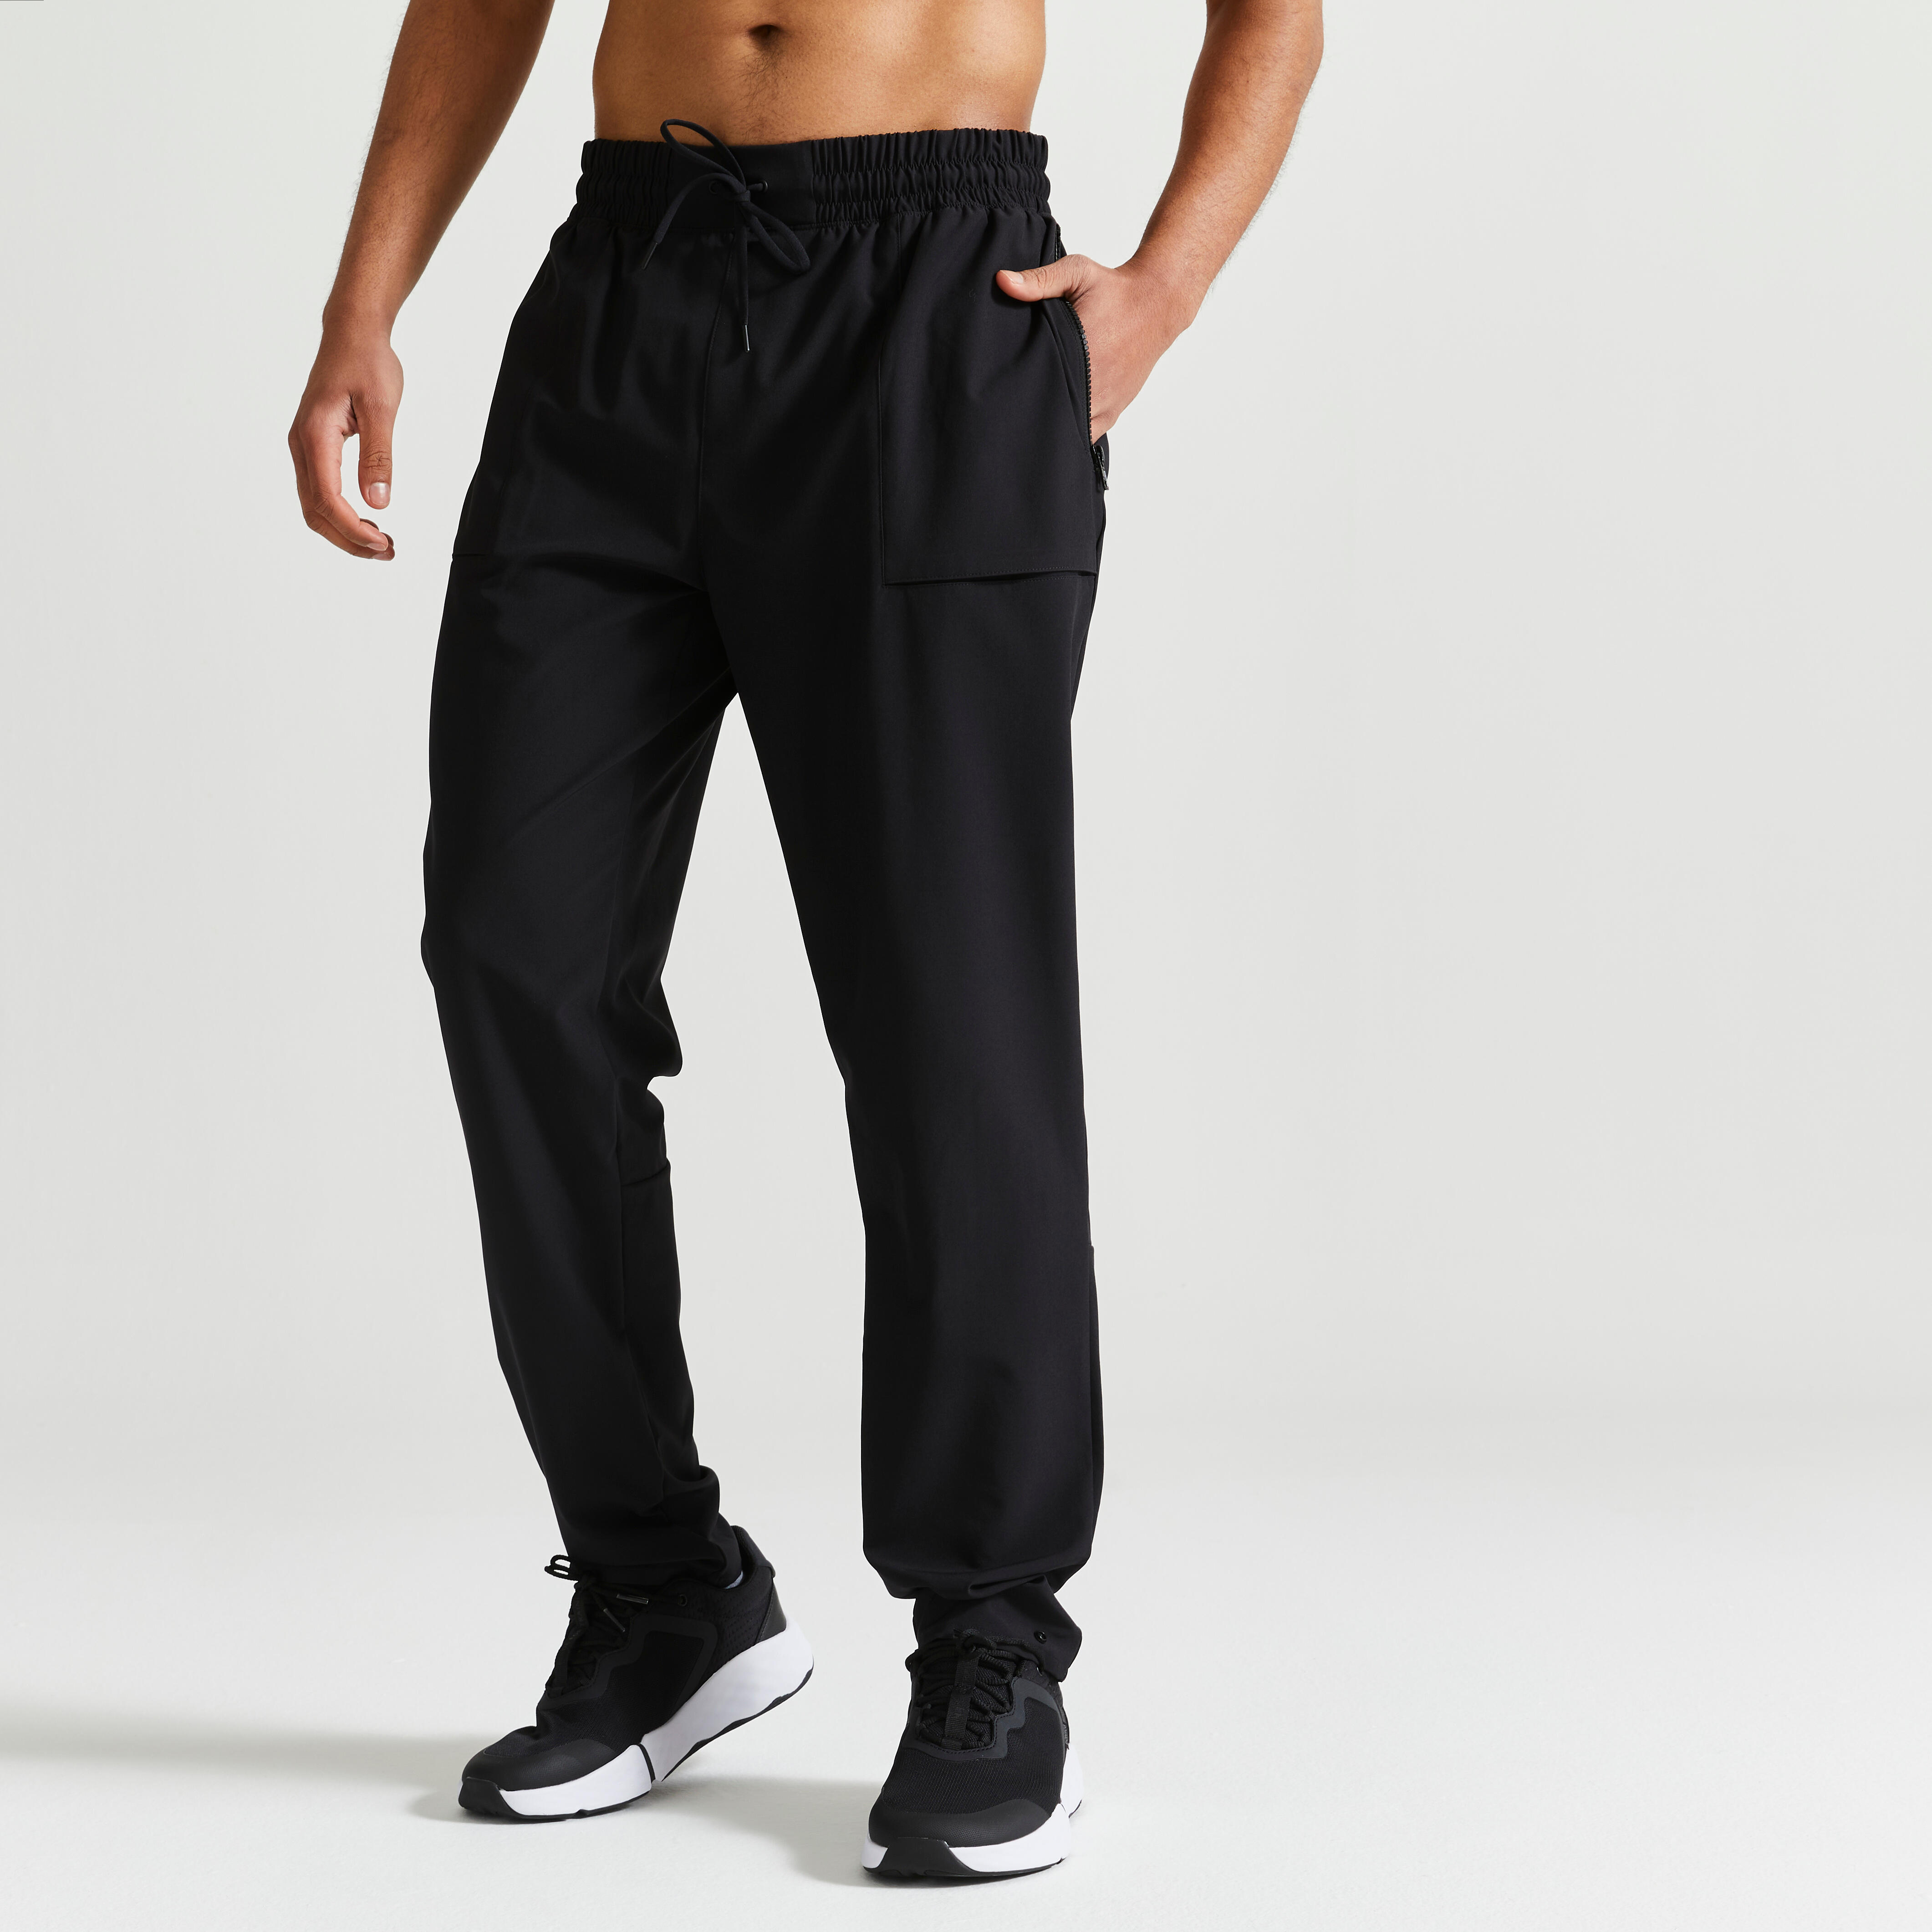 Share more than 62 decathlon track pants singapore latest - in.eteachers